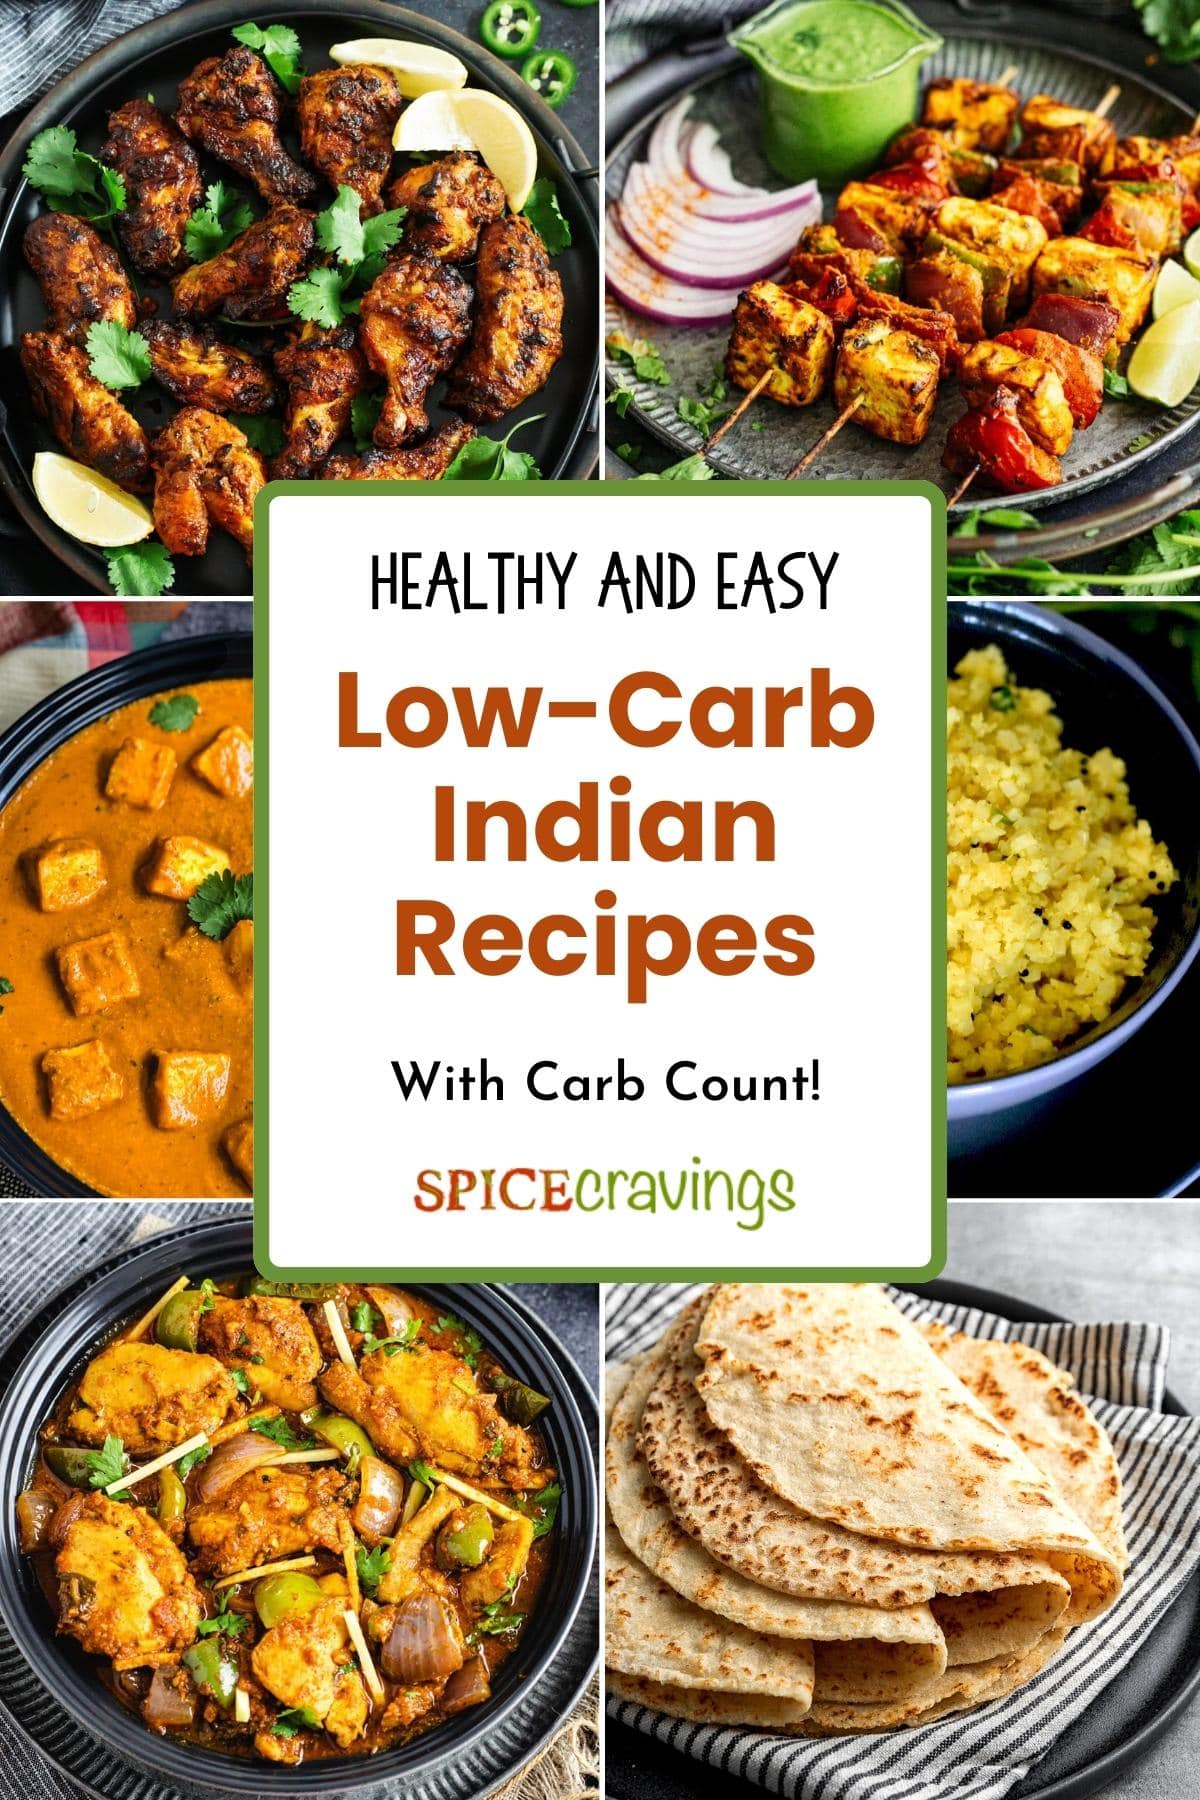 Collage of 6 Low Carb Indian Food Recipes including chicken, paneer and vegetables